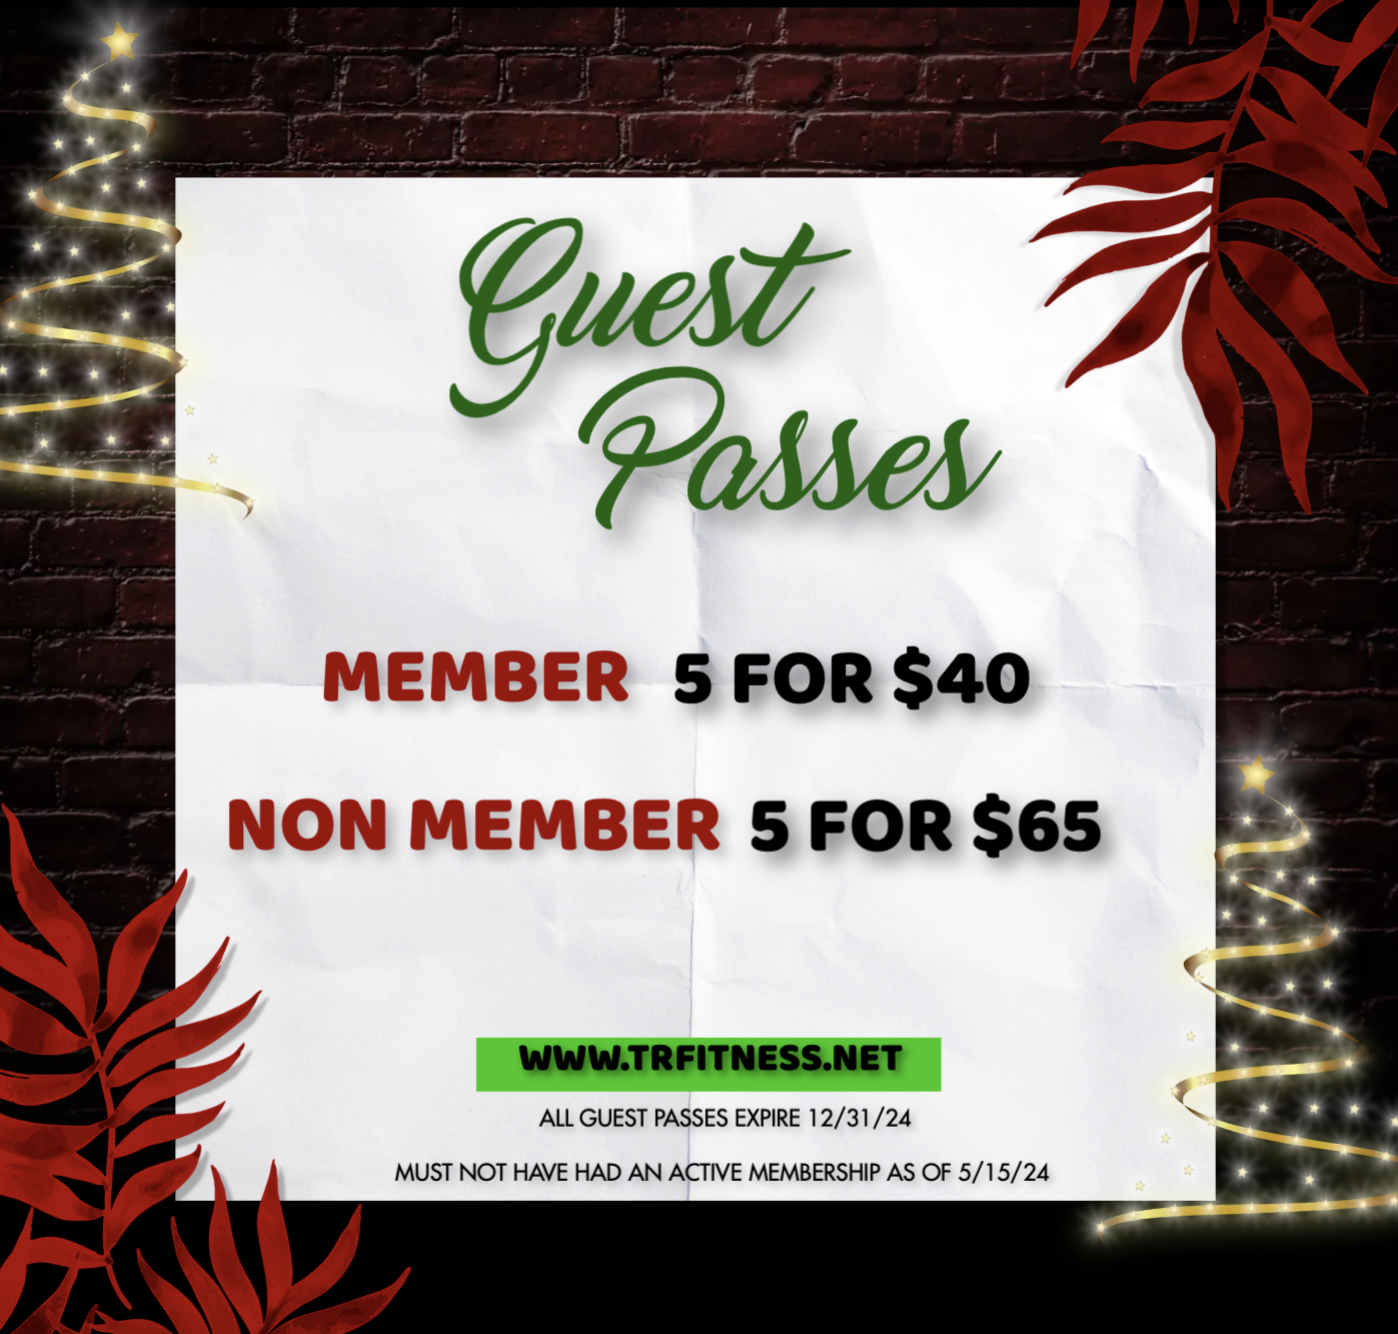 CHRISTMAS IN JULY - GUEST PASSES